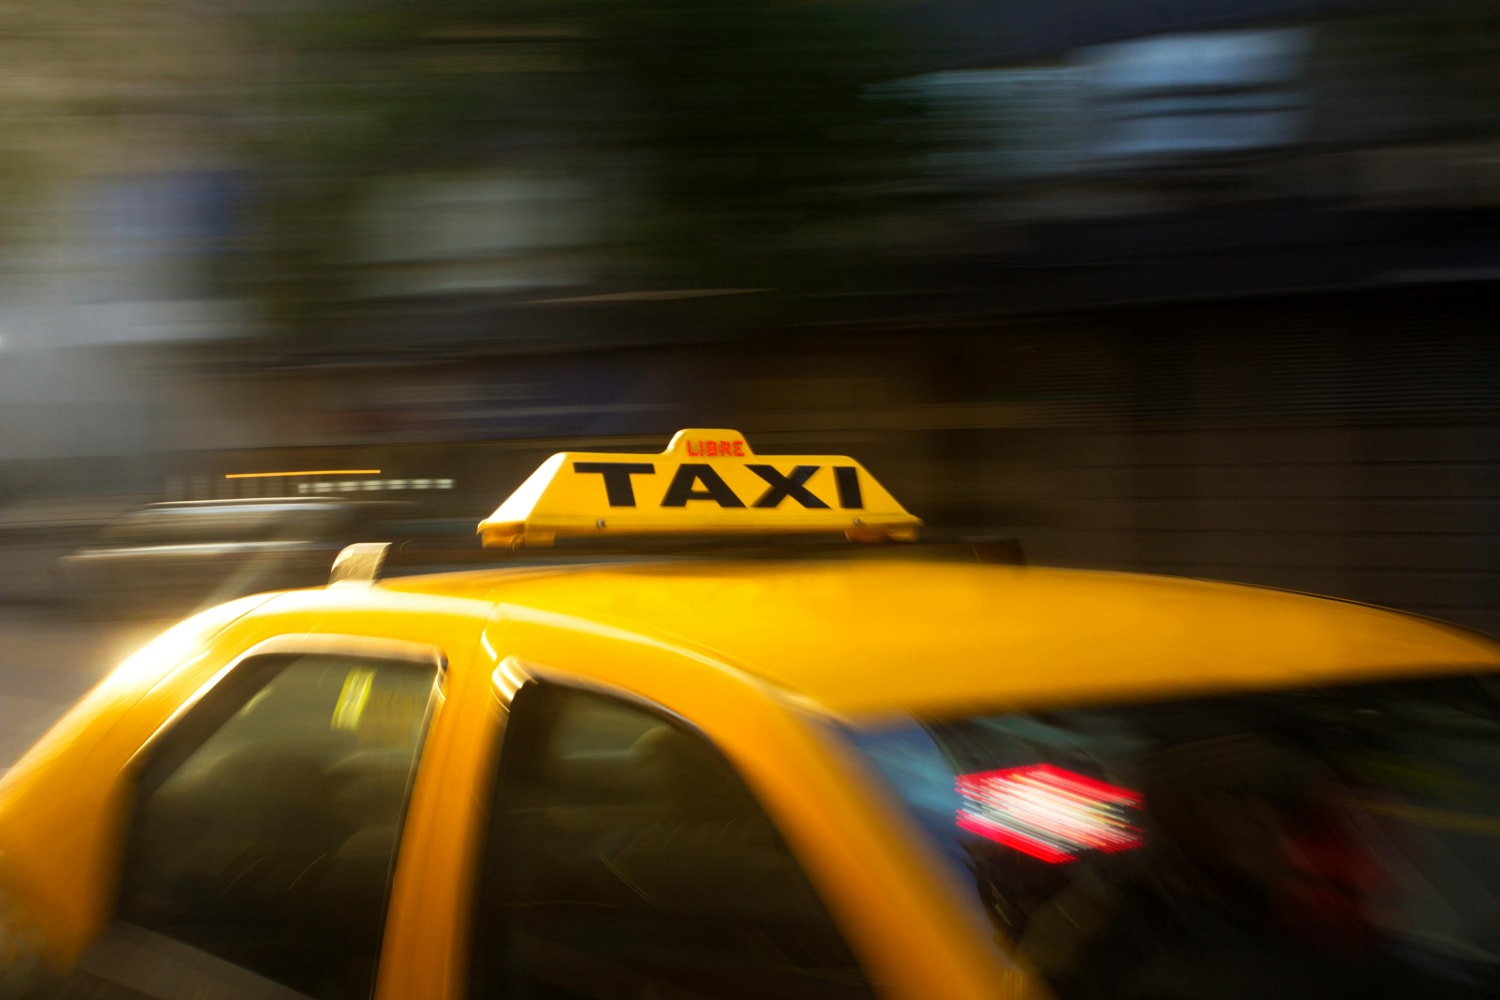 Local Taxi Services